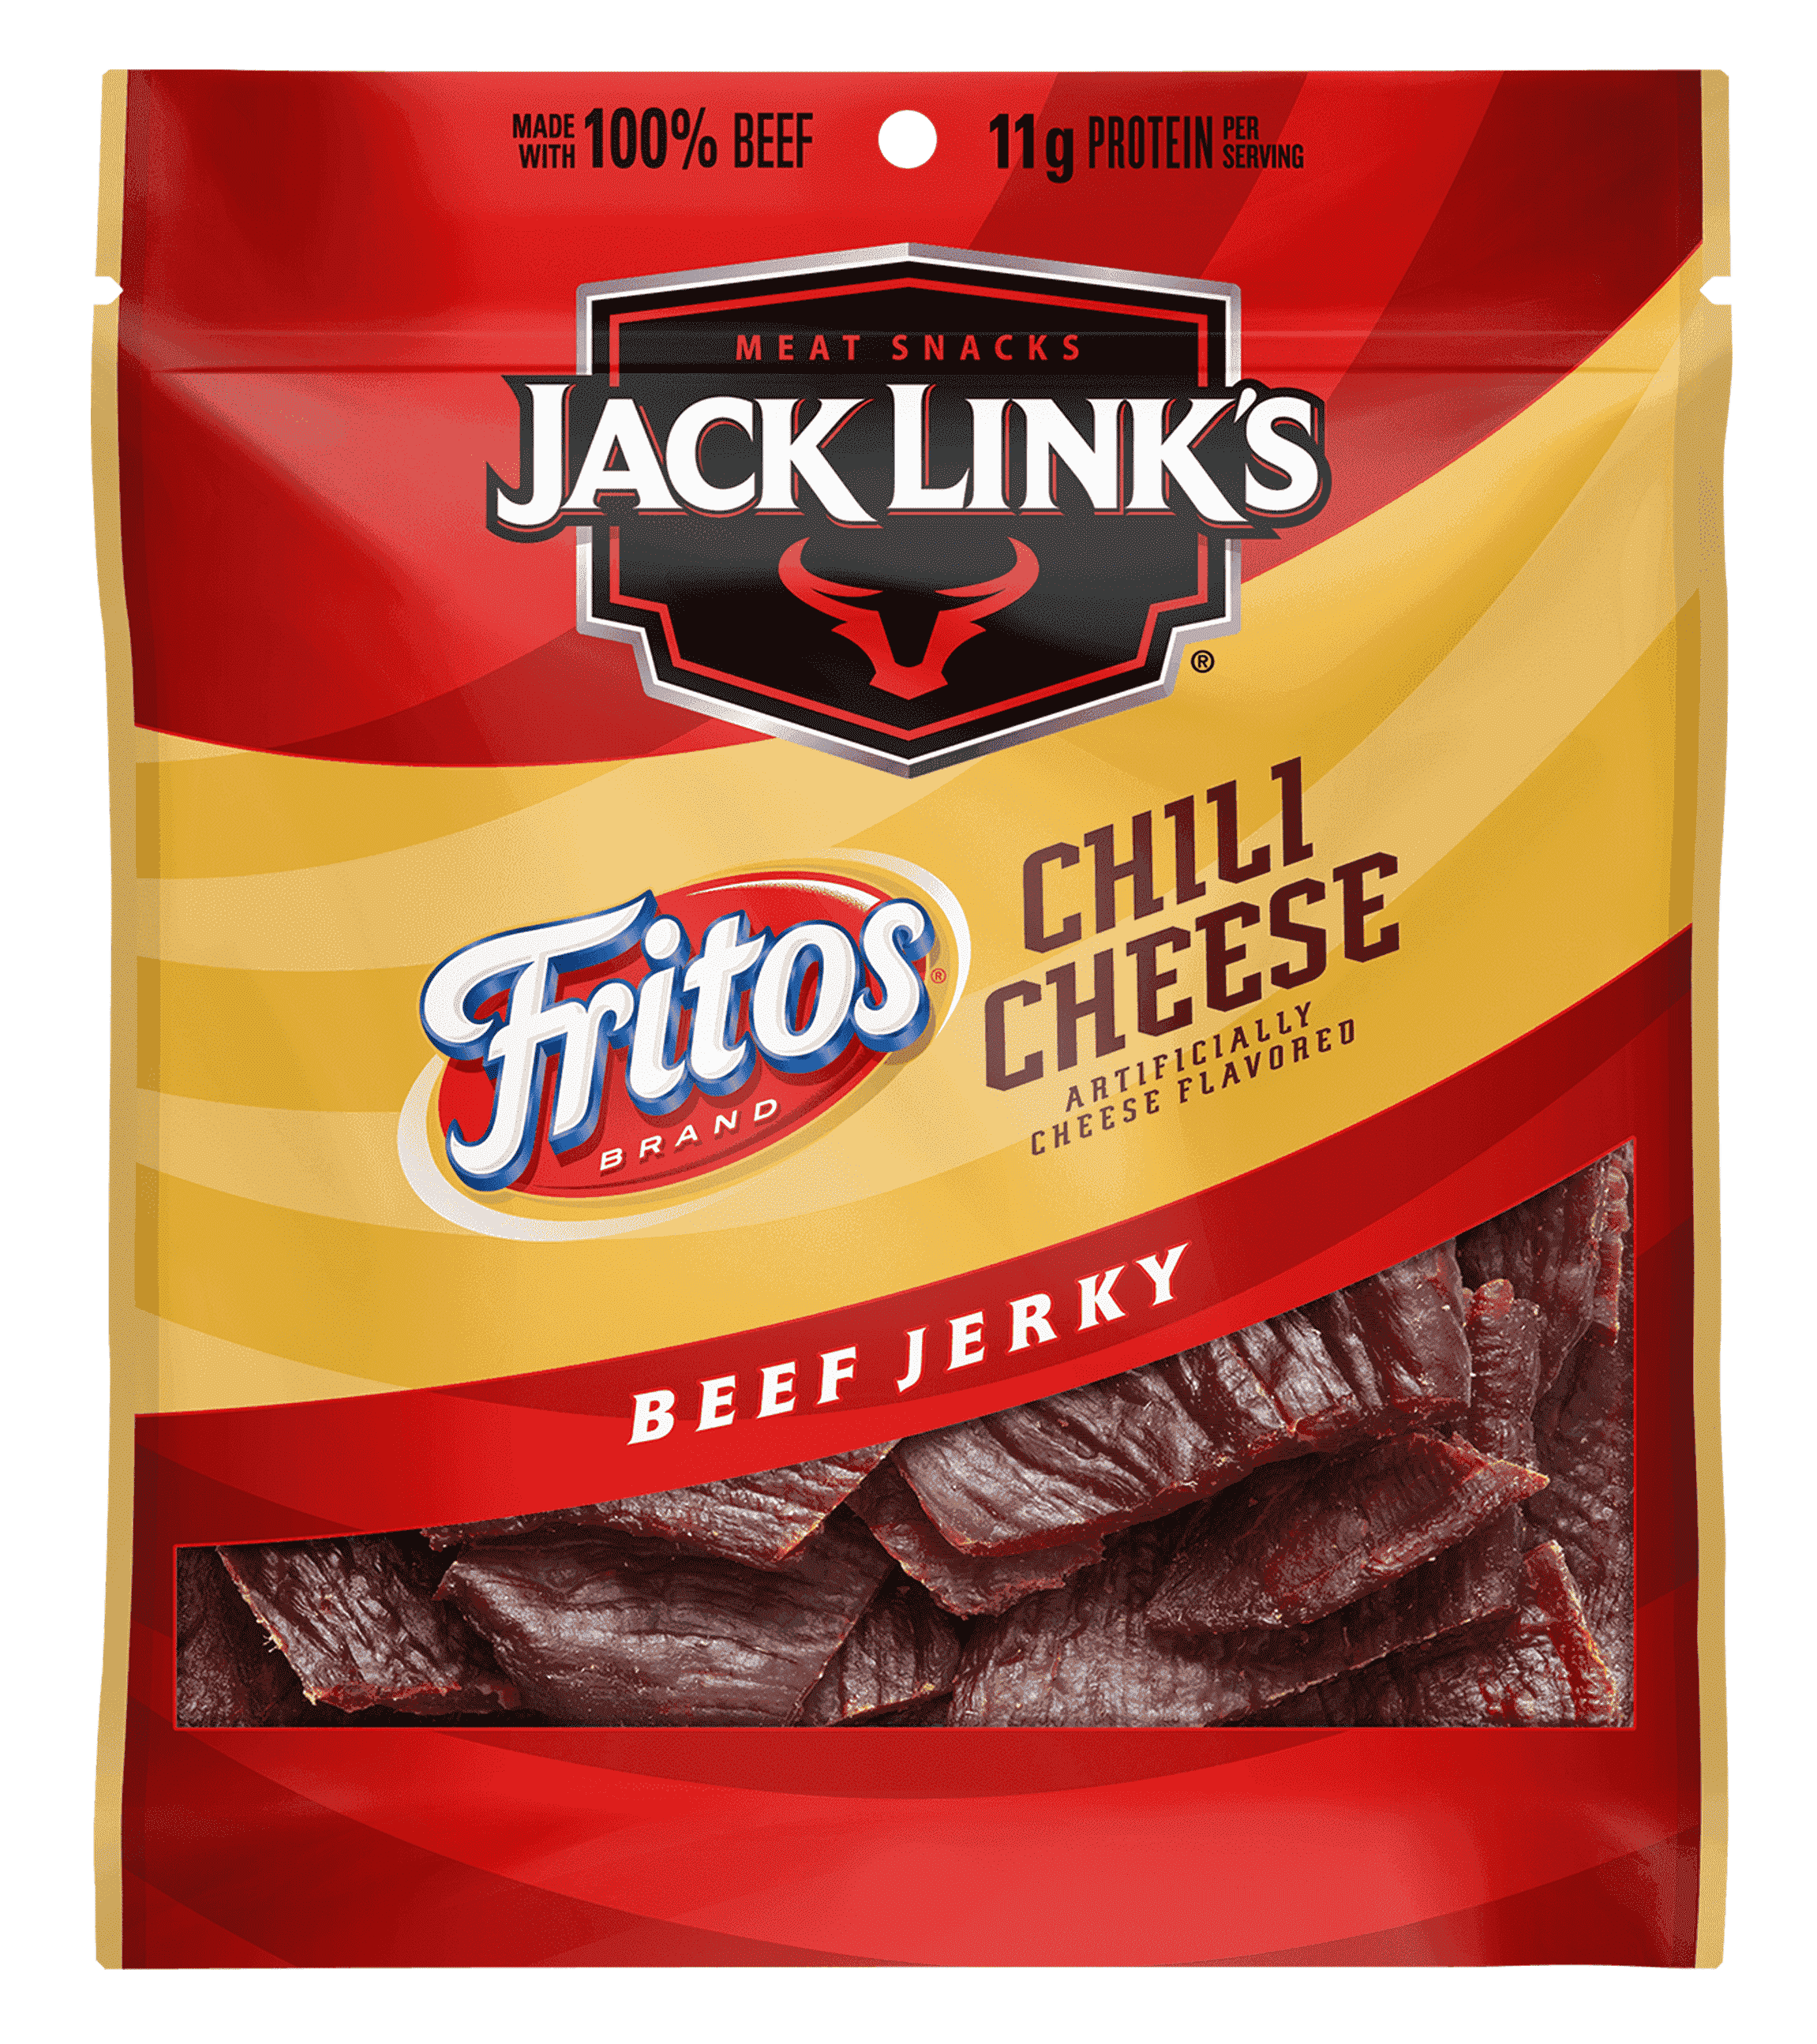 Bag of Chili Cheese Flavored Beef Jerky